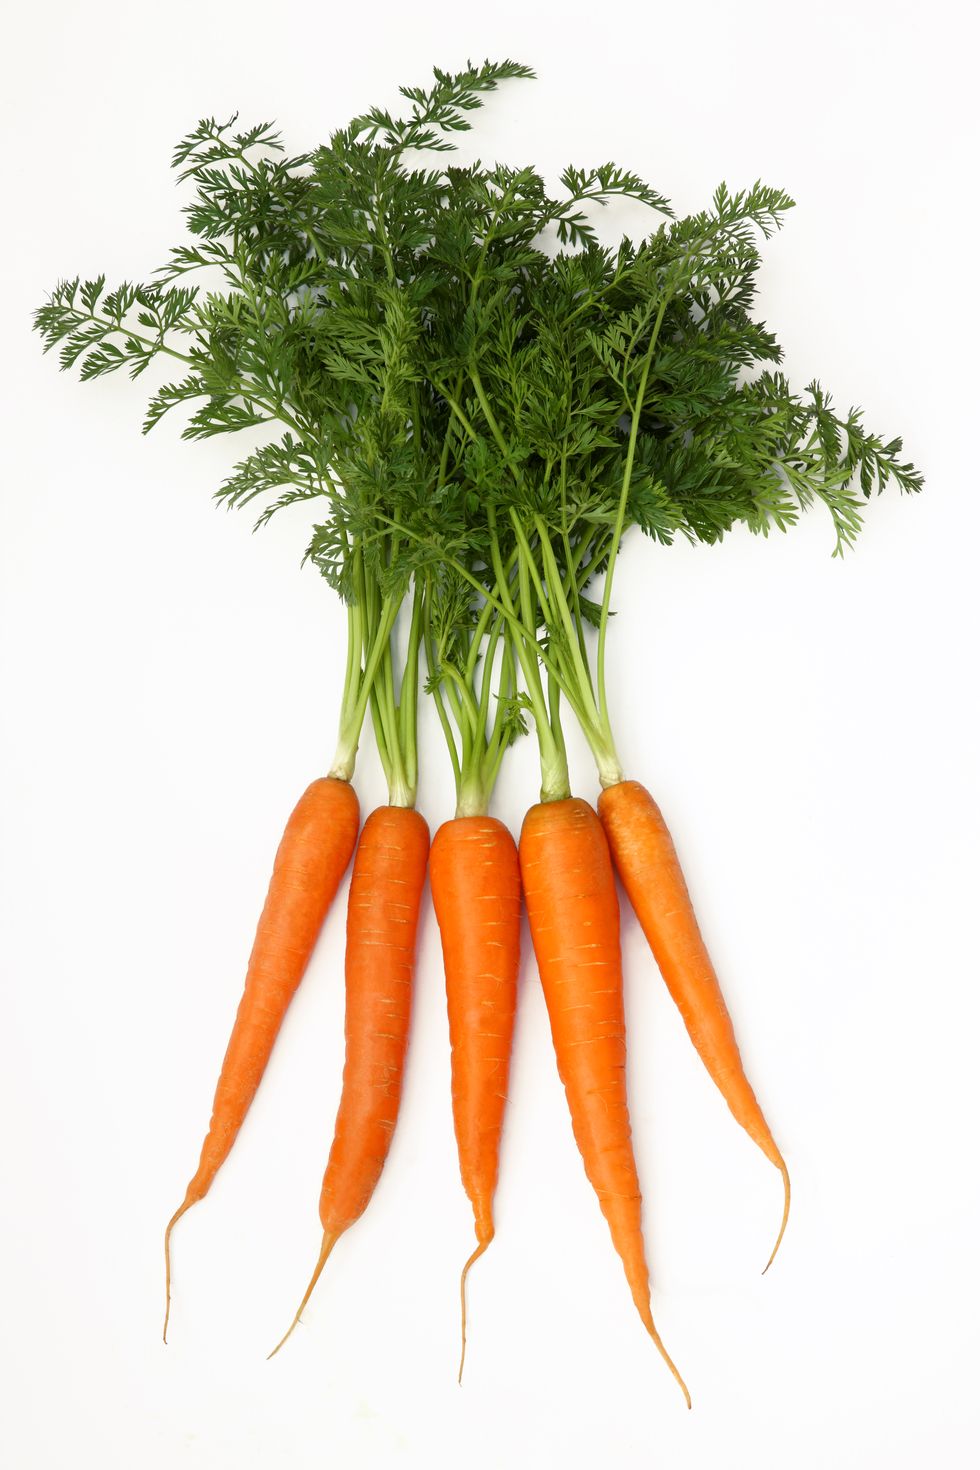 Five fresh organic carrots with green tops.